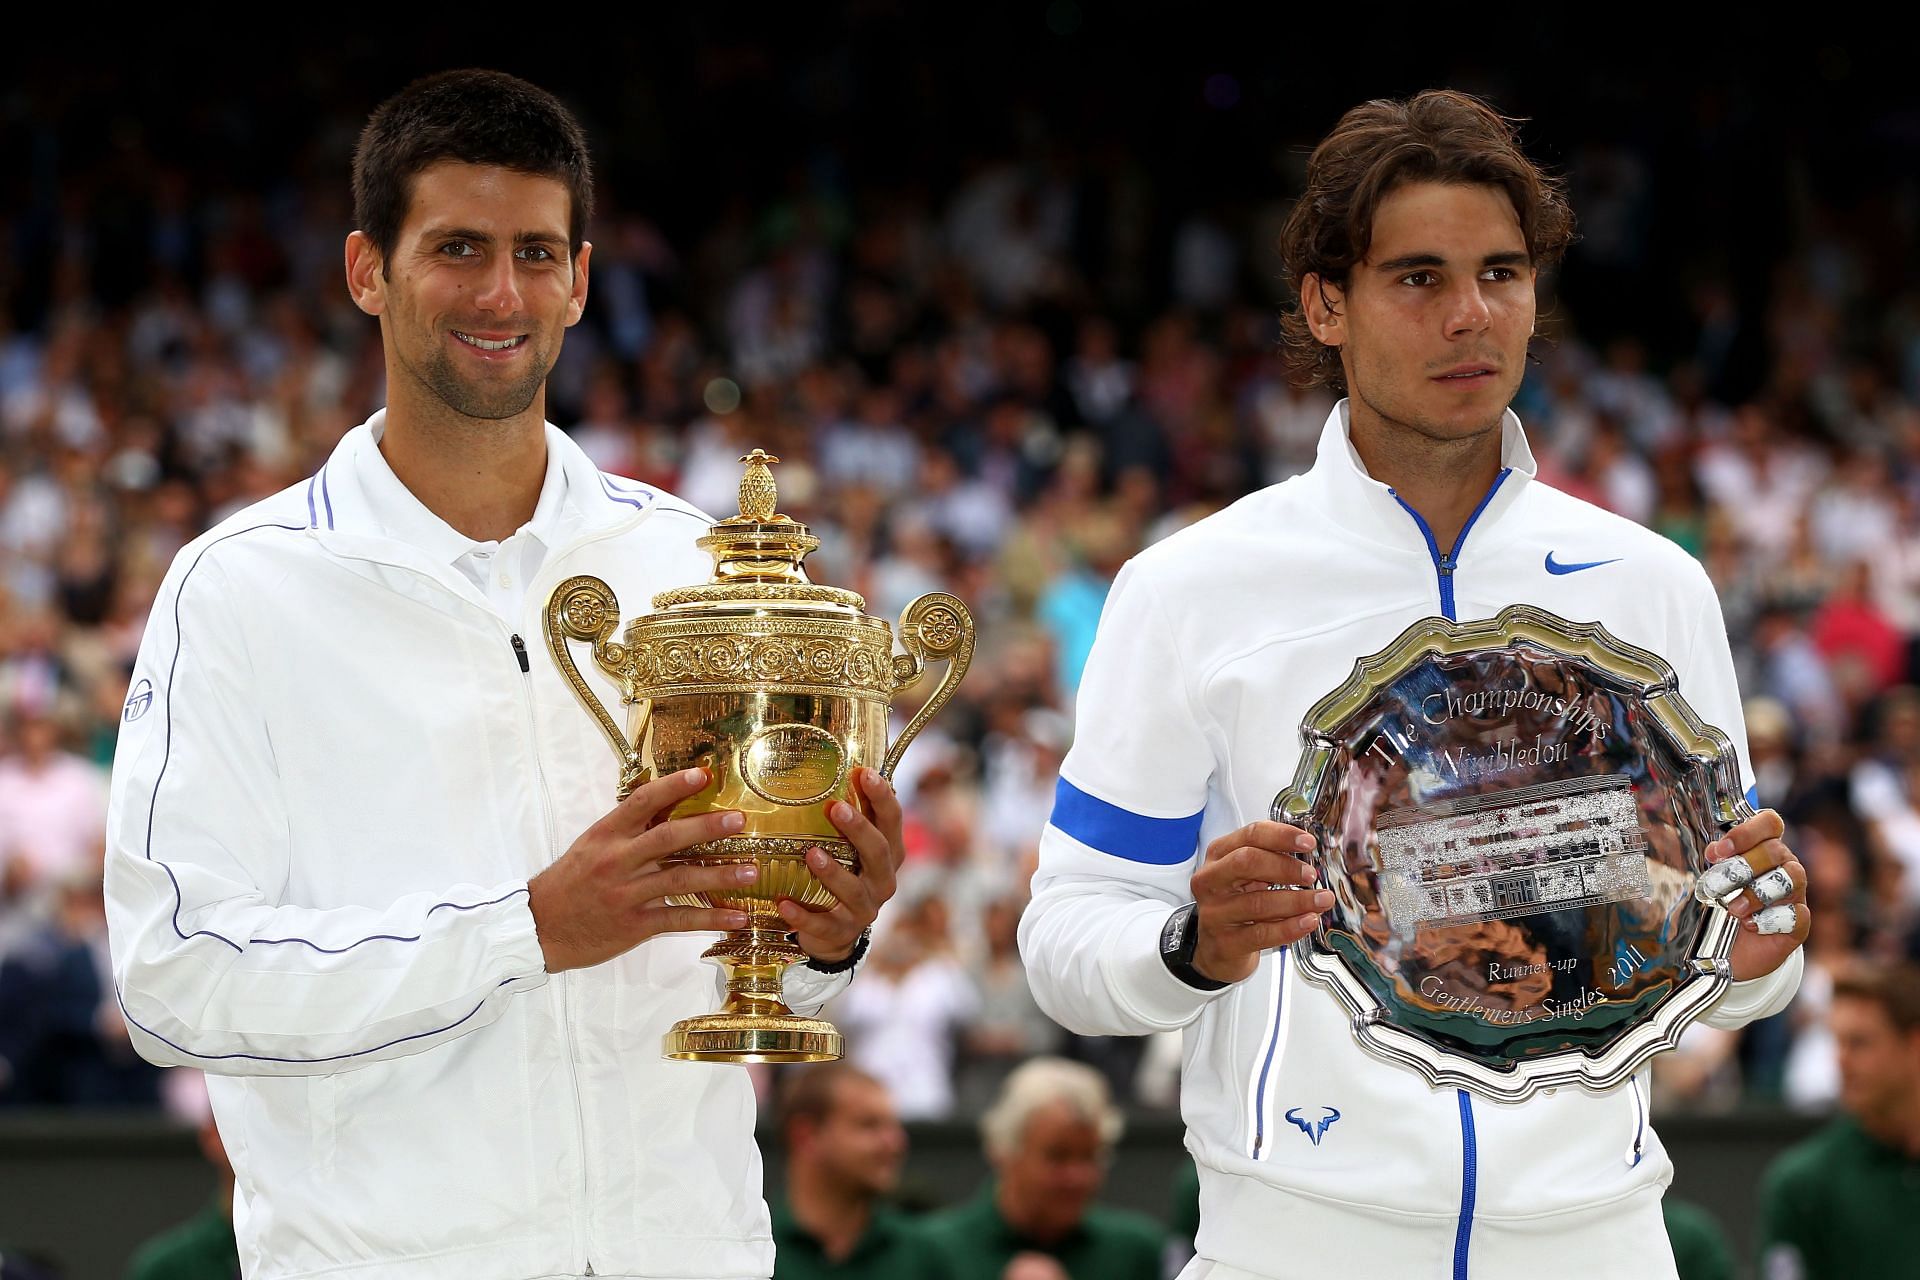 Novak Djokovic and Rafael Nadal hold their respective trophies after their Wimbledon final clash in 2011.